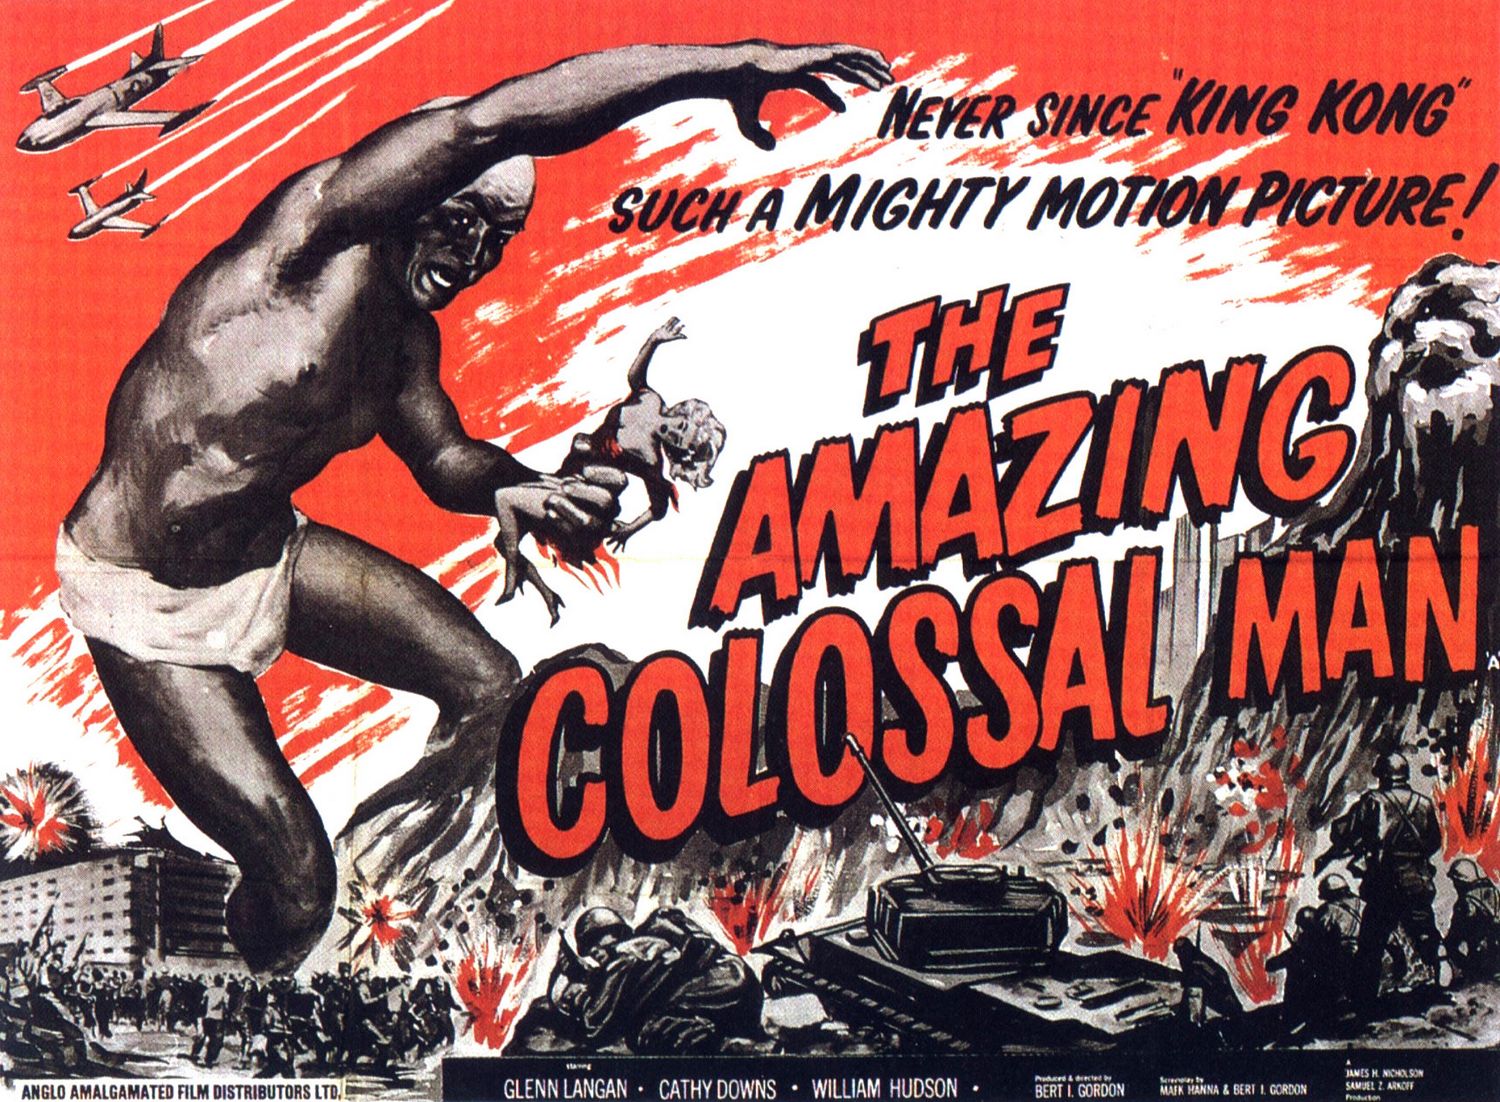 Return to Main Page for The Amazing Colossal Man Posters